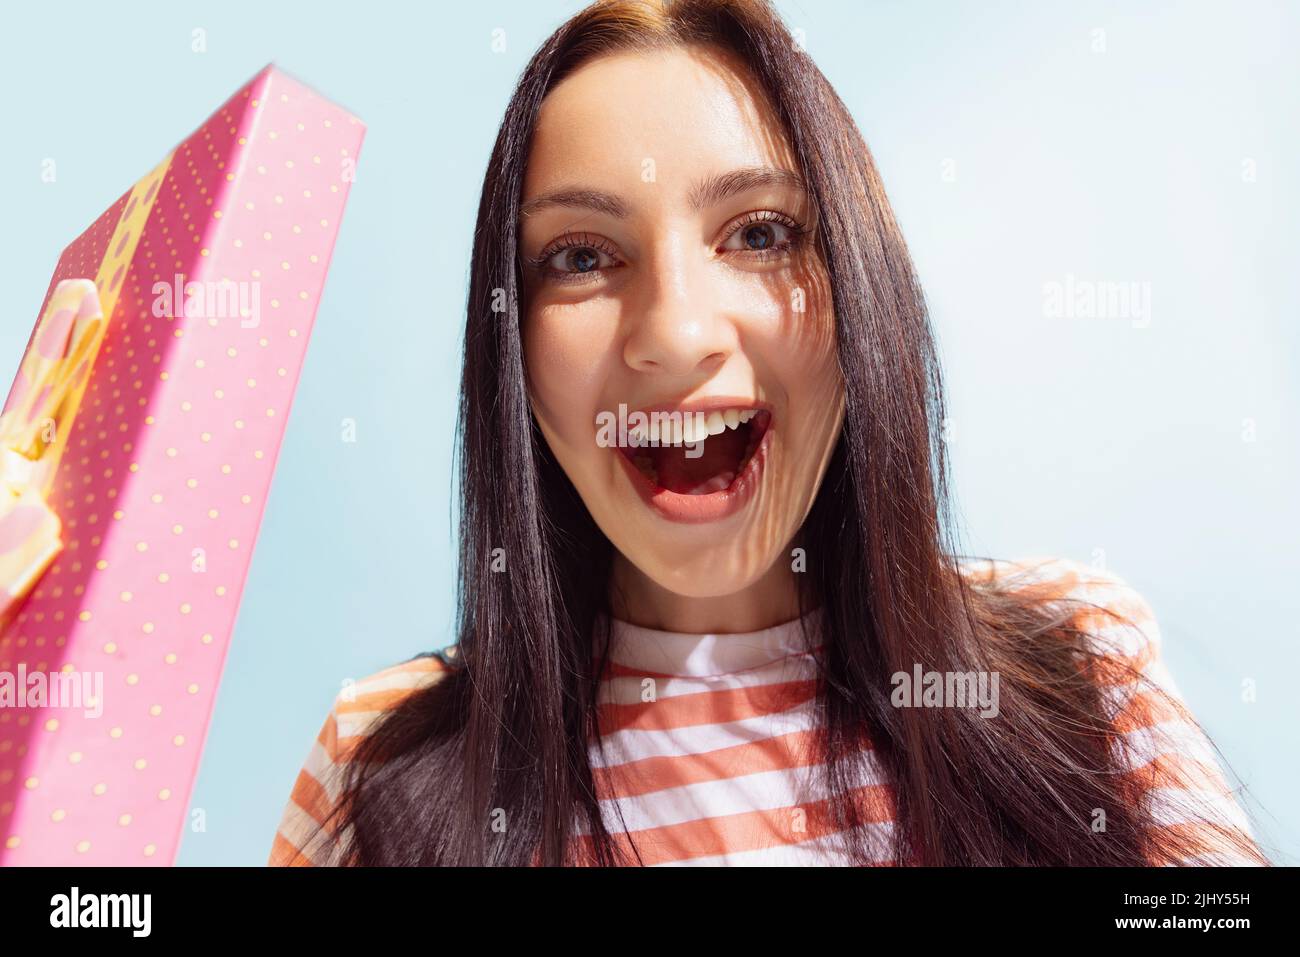 Closeup face of young beautiful astonished girl holding gift box isolated on blue background. Concept of emotions, holidays, inspiration, sales, ad. Stock Photo